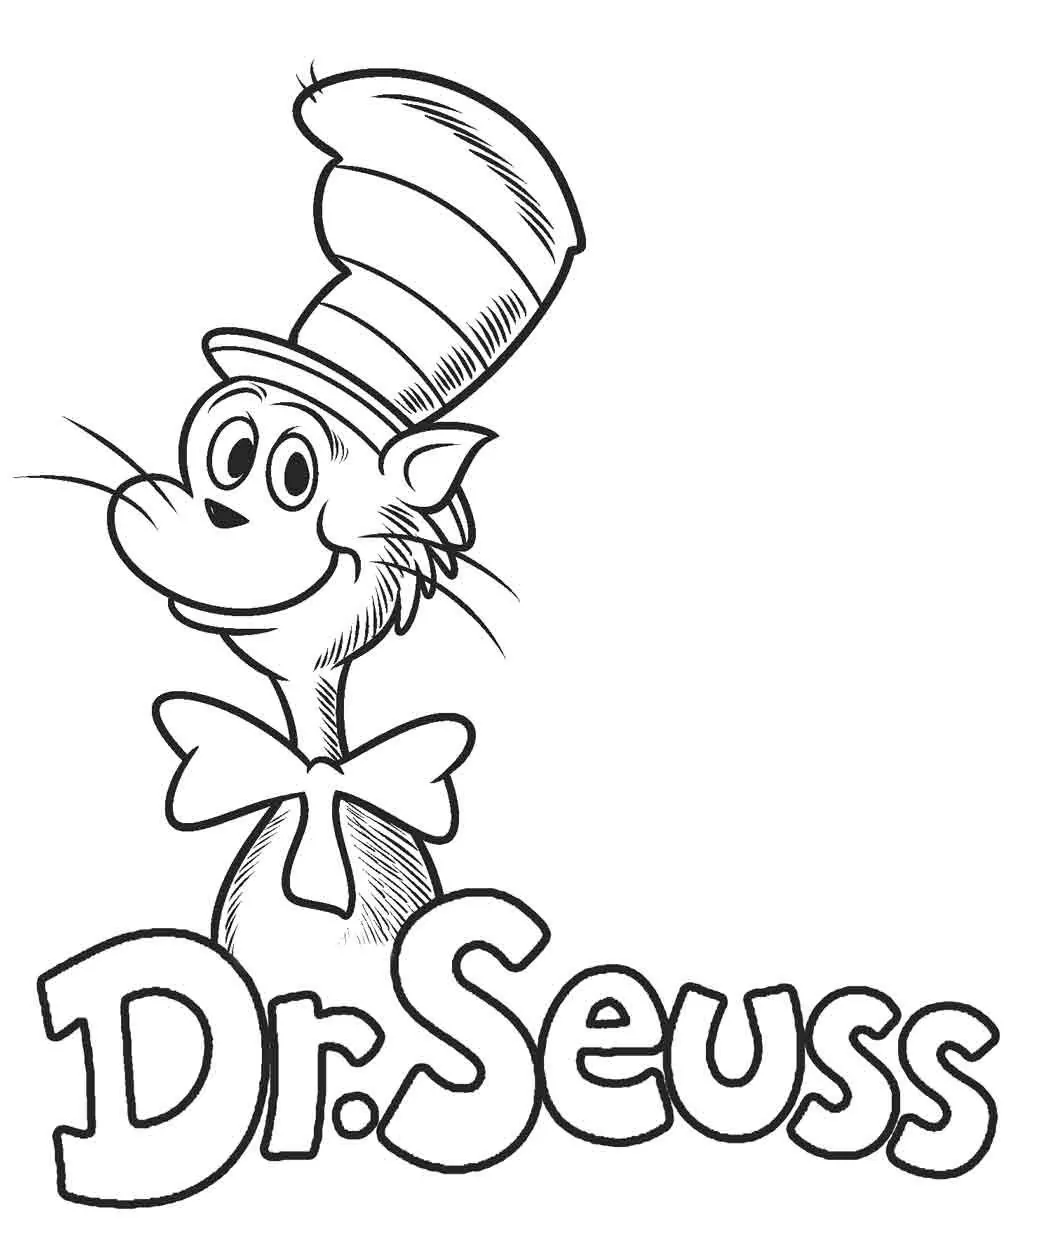 Dr. Seuss’s Character